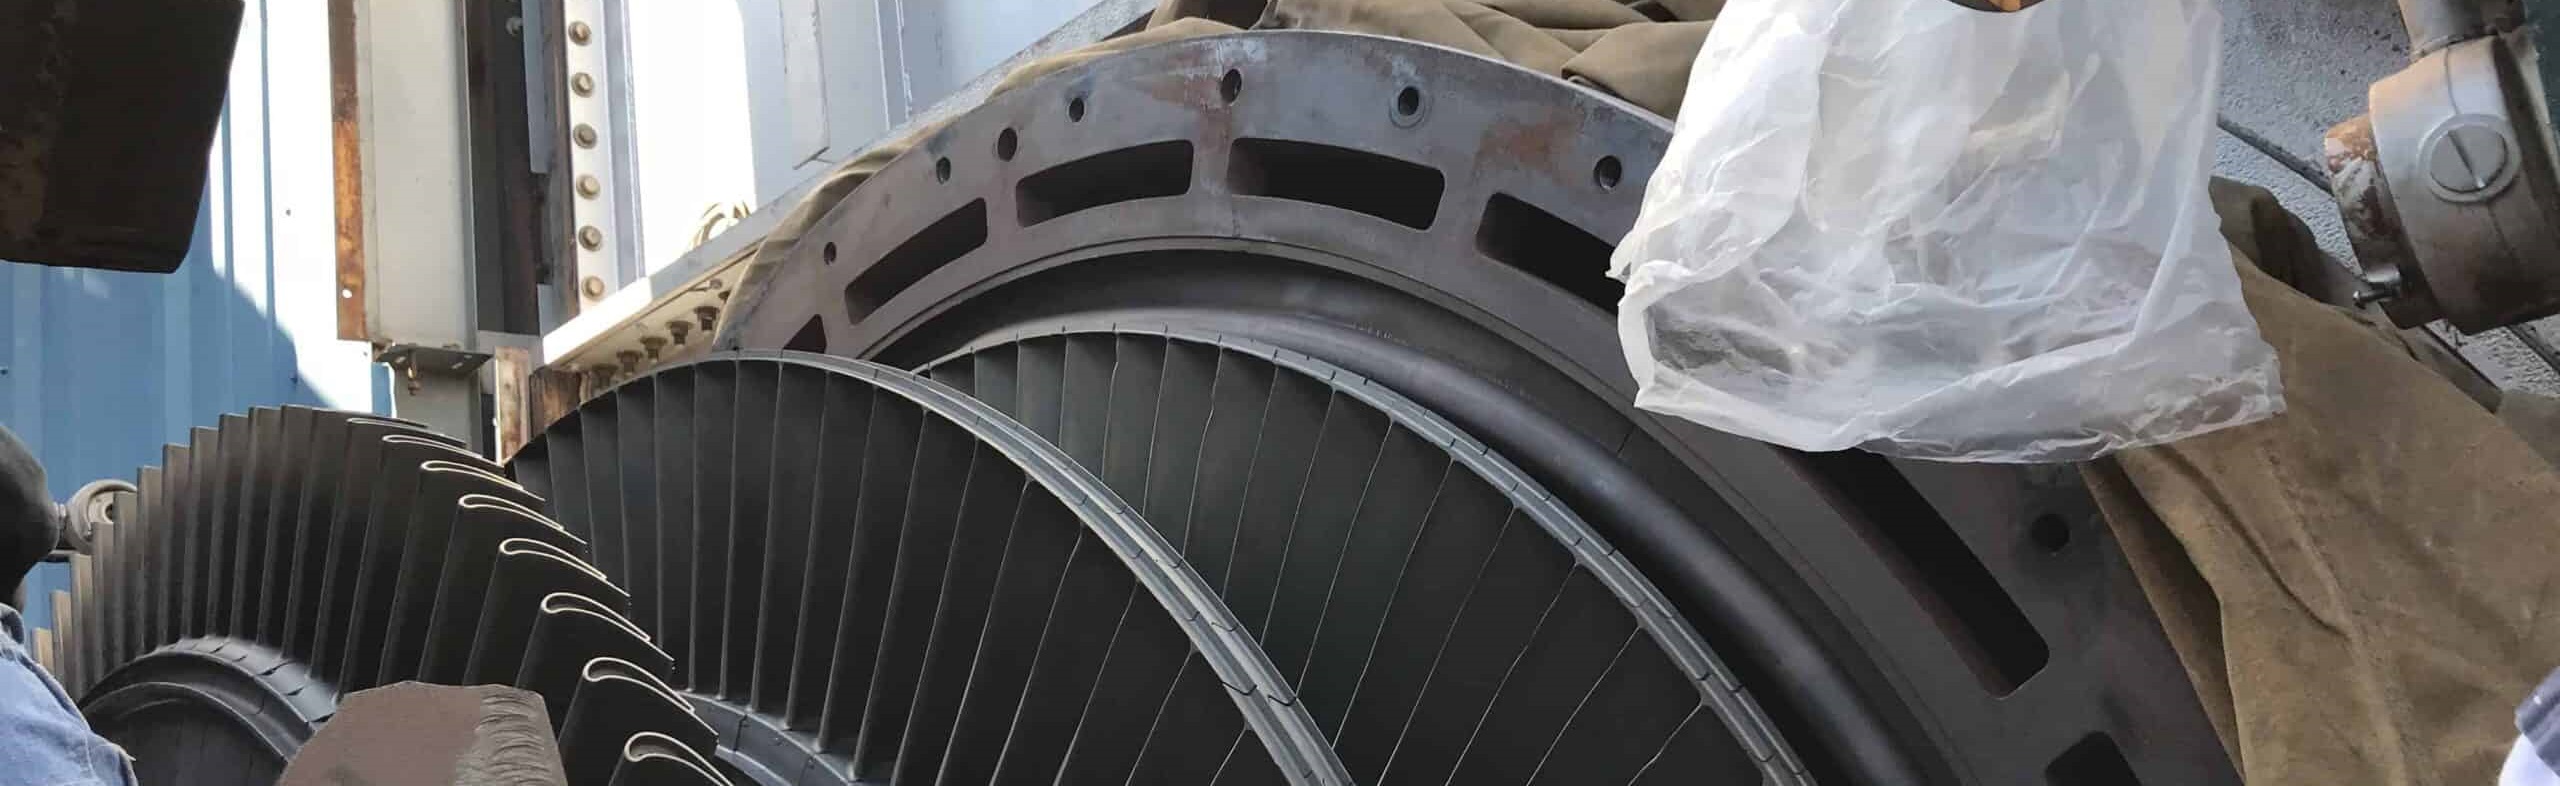 Combustion Turbine Loss Prevention Inspection